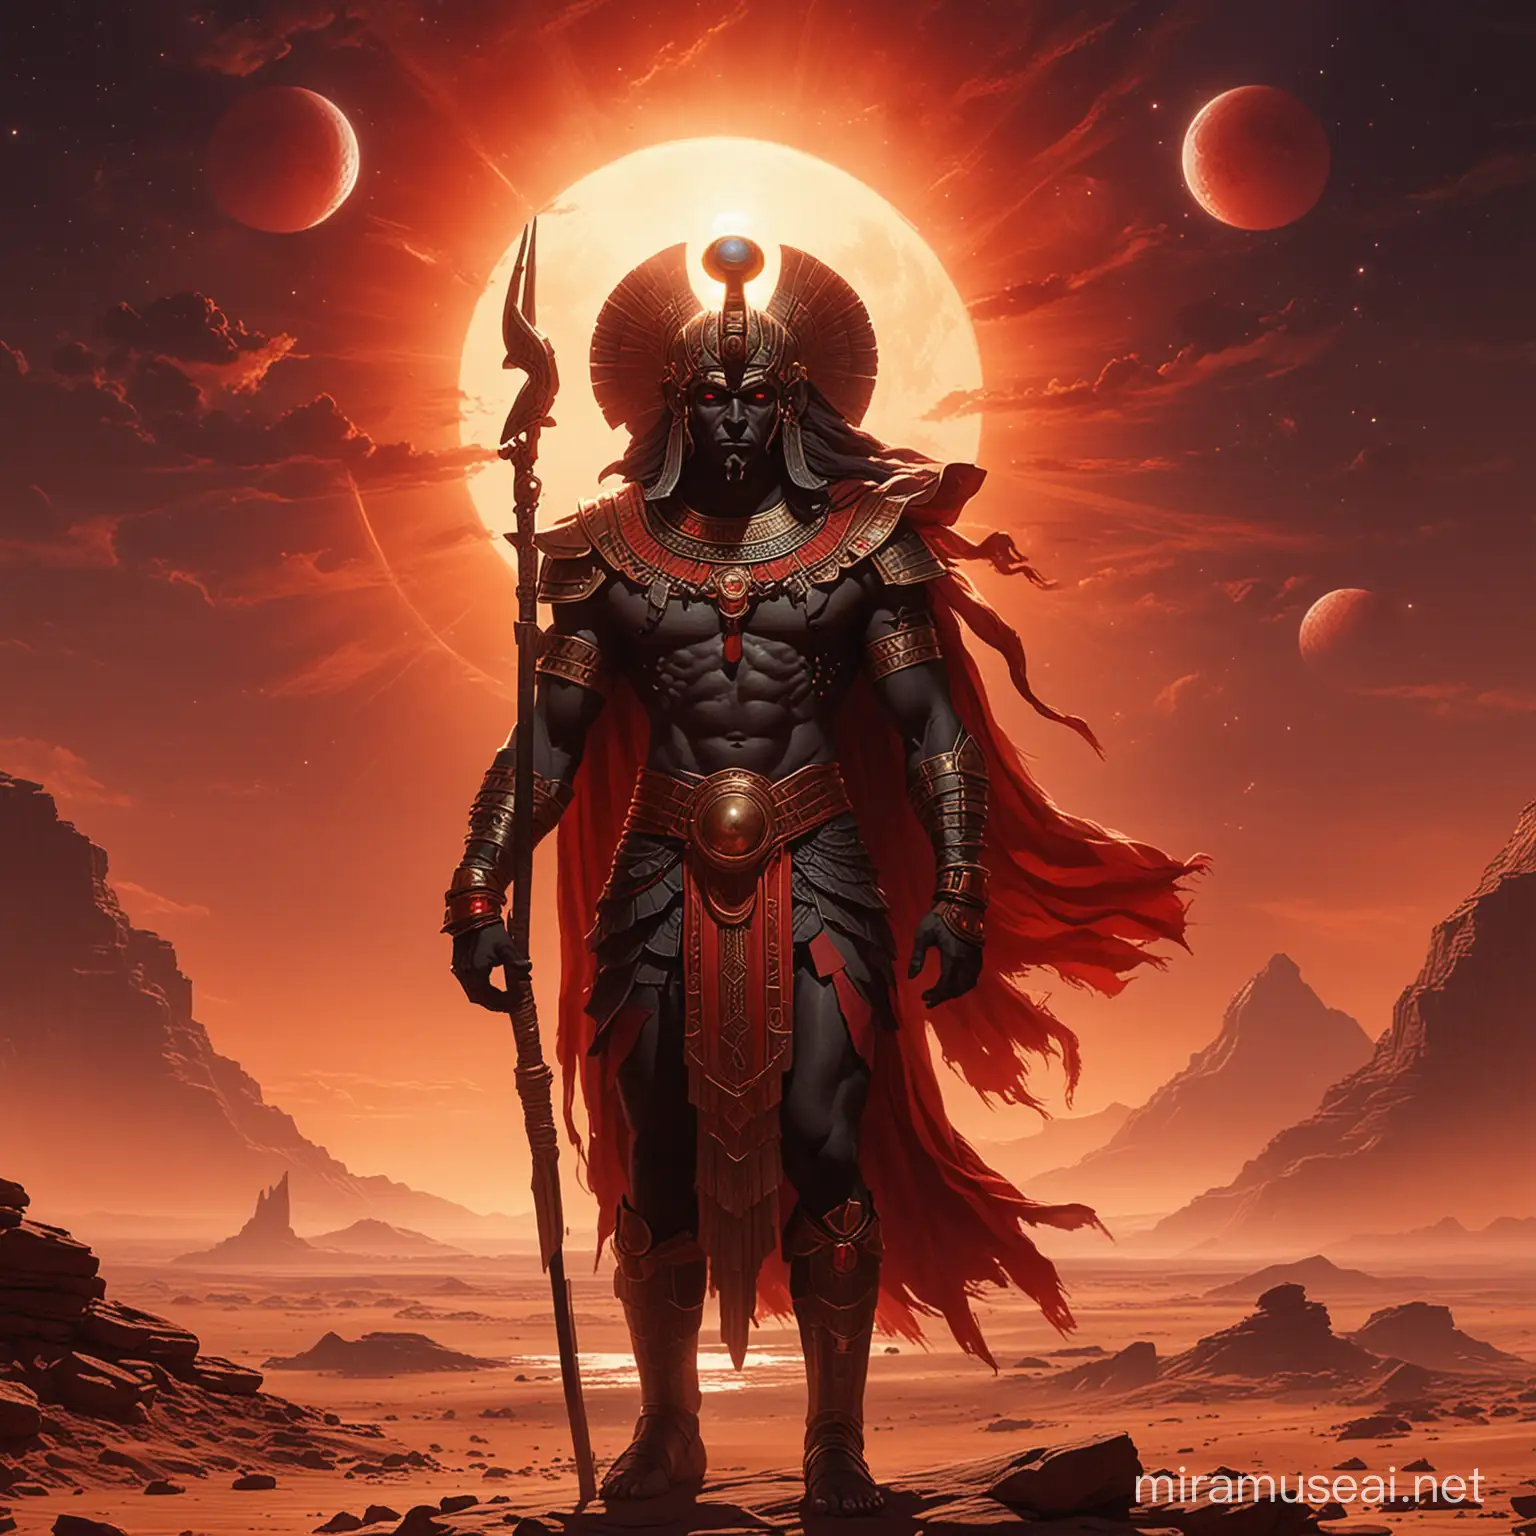 A character of the god osiris , background depicts a crimson moons multiple suns on the horizon, dark colors, daunting, menacing, the background should be in the underworld.